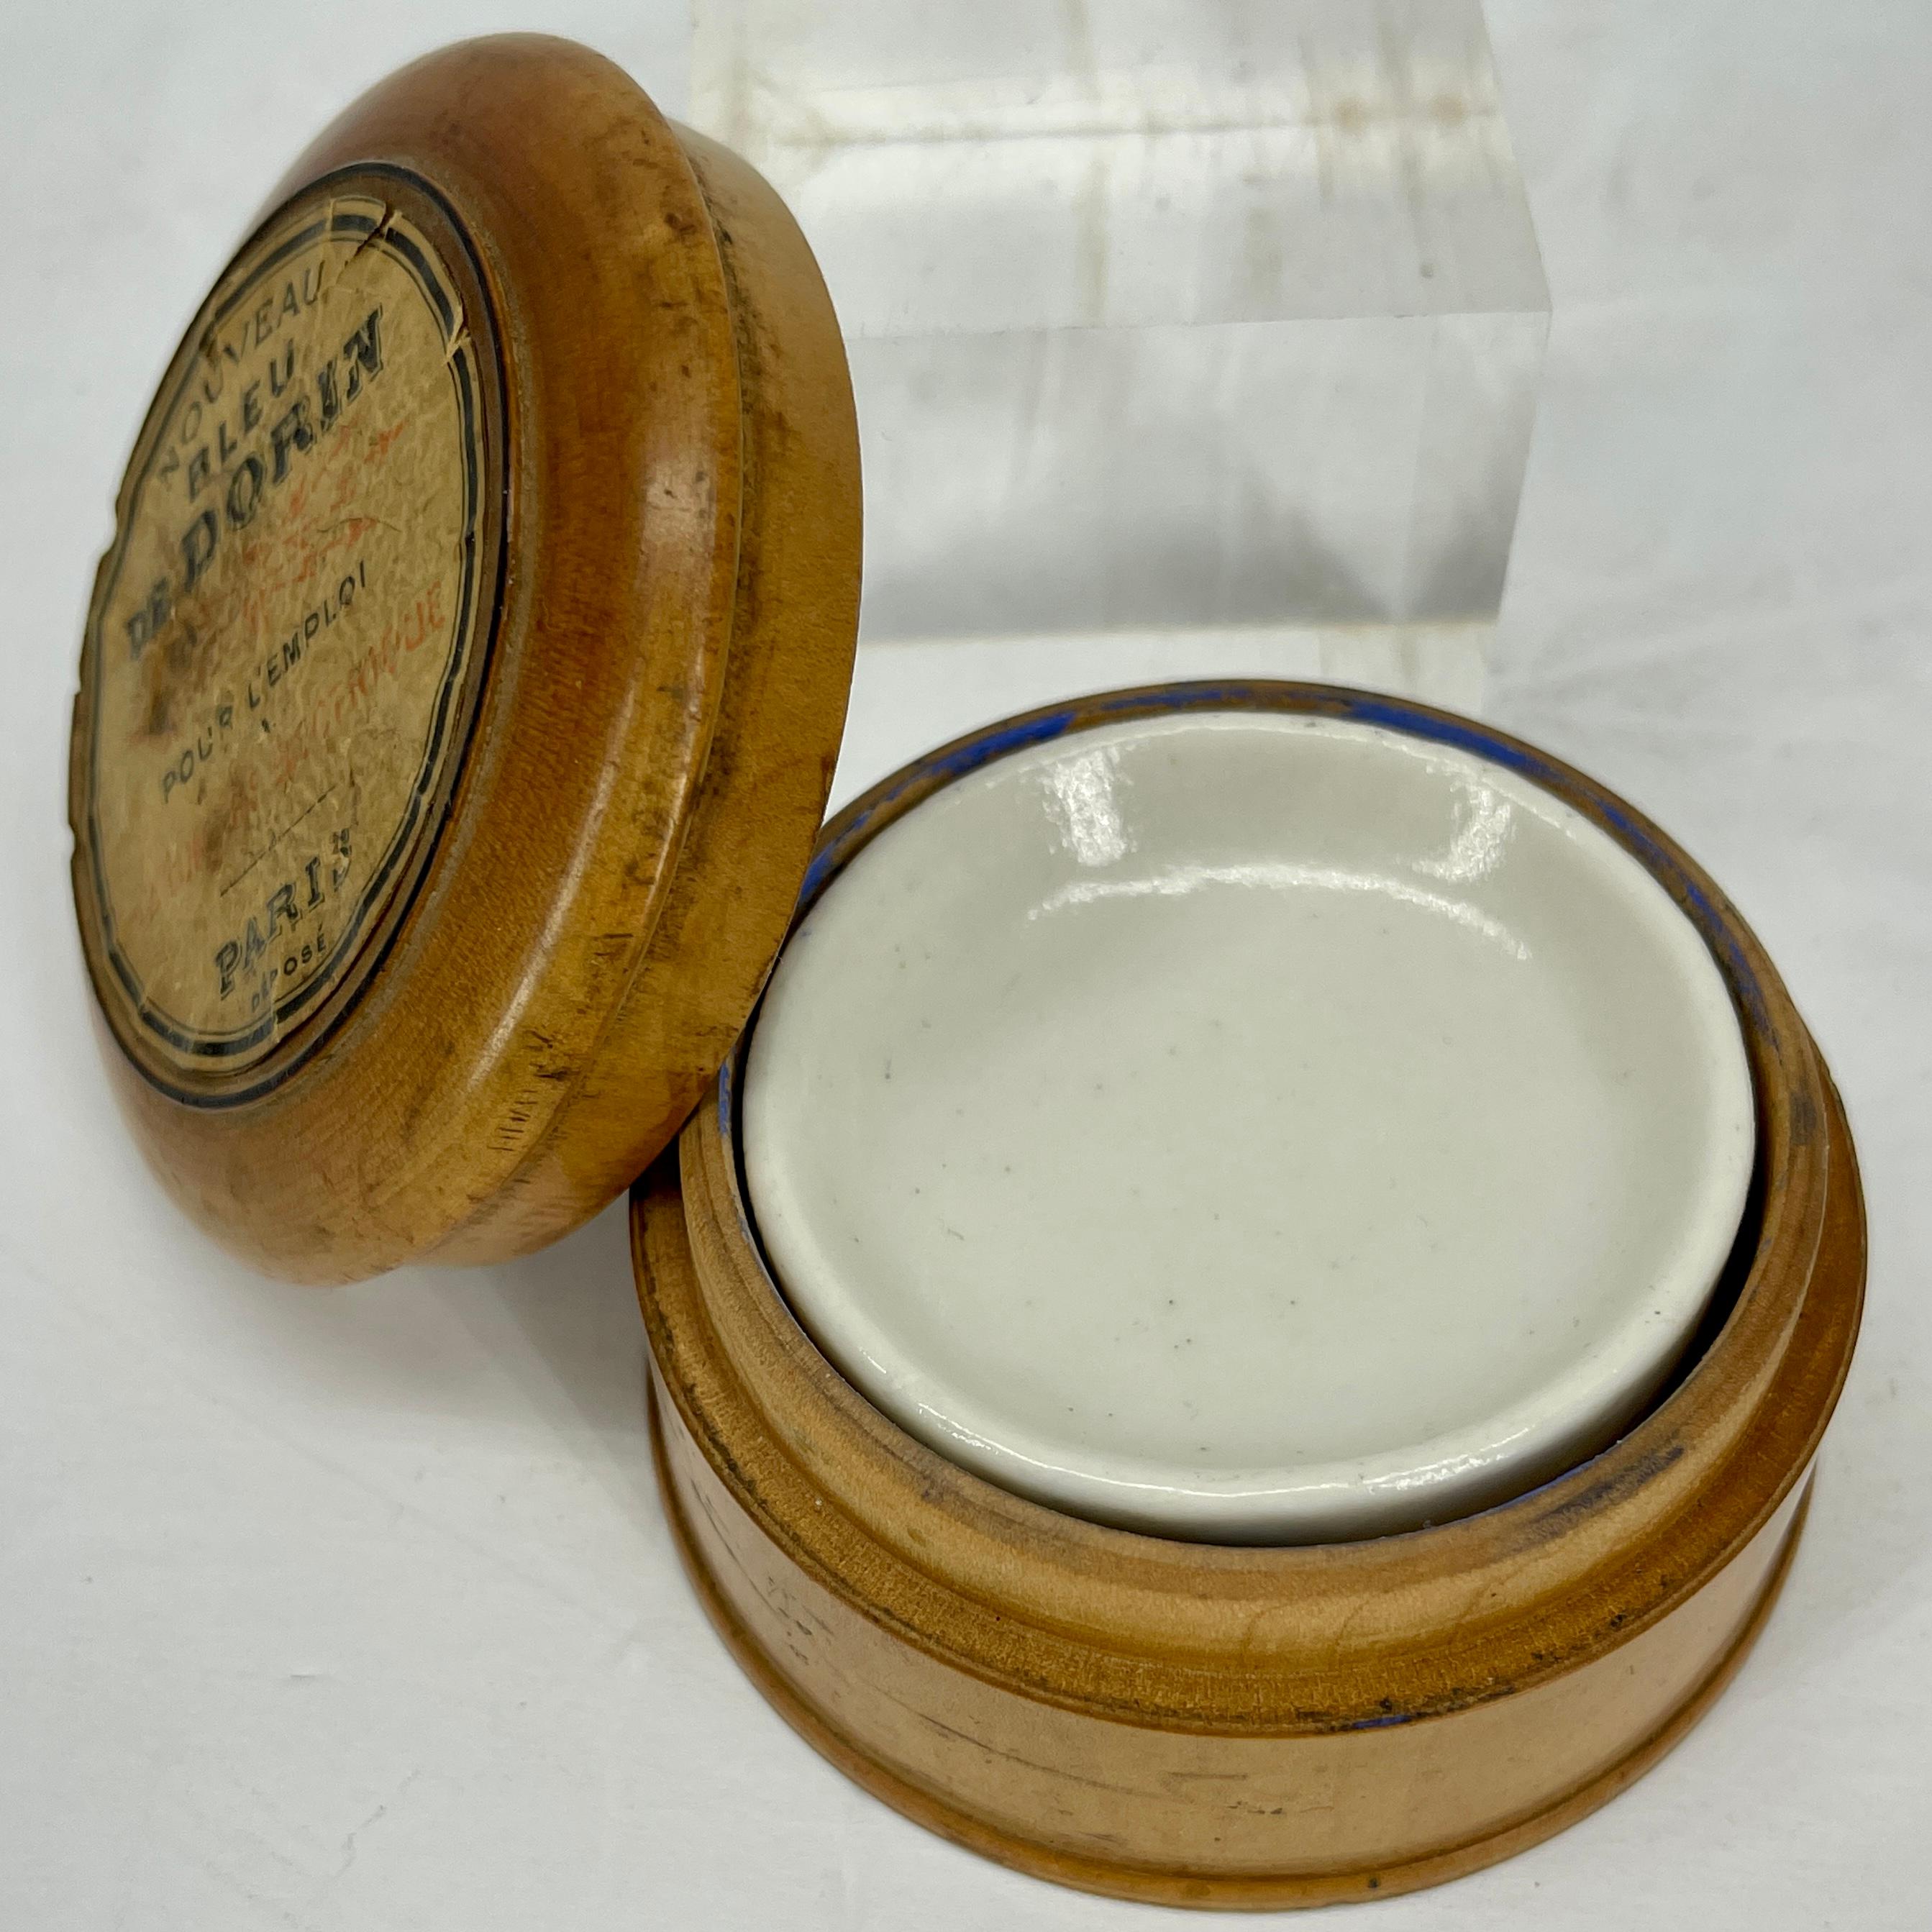 Antique French Cosmetic Face Powder Compact Box In Good Condition For Sale In Haddonfield, NJ